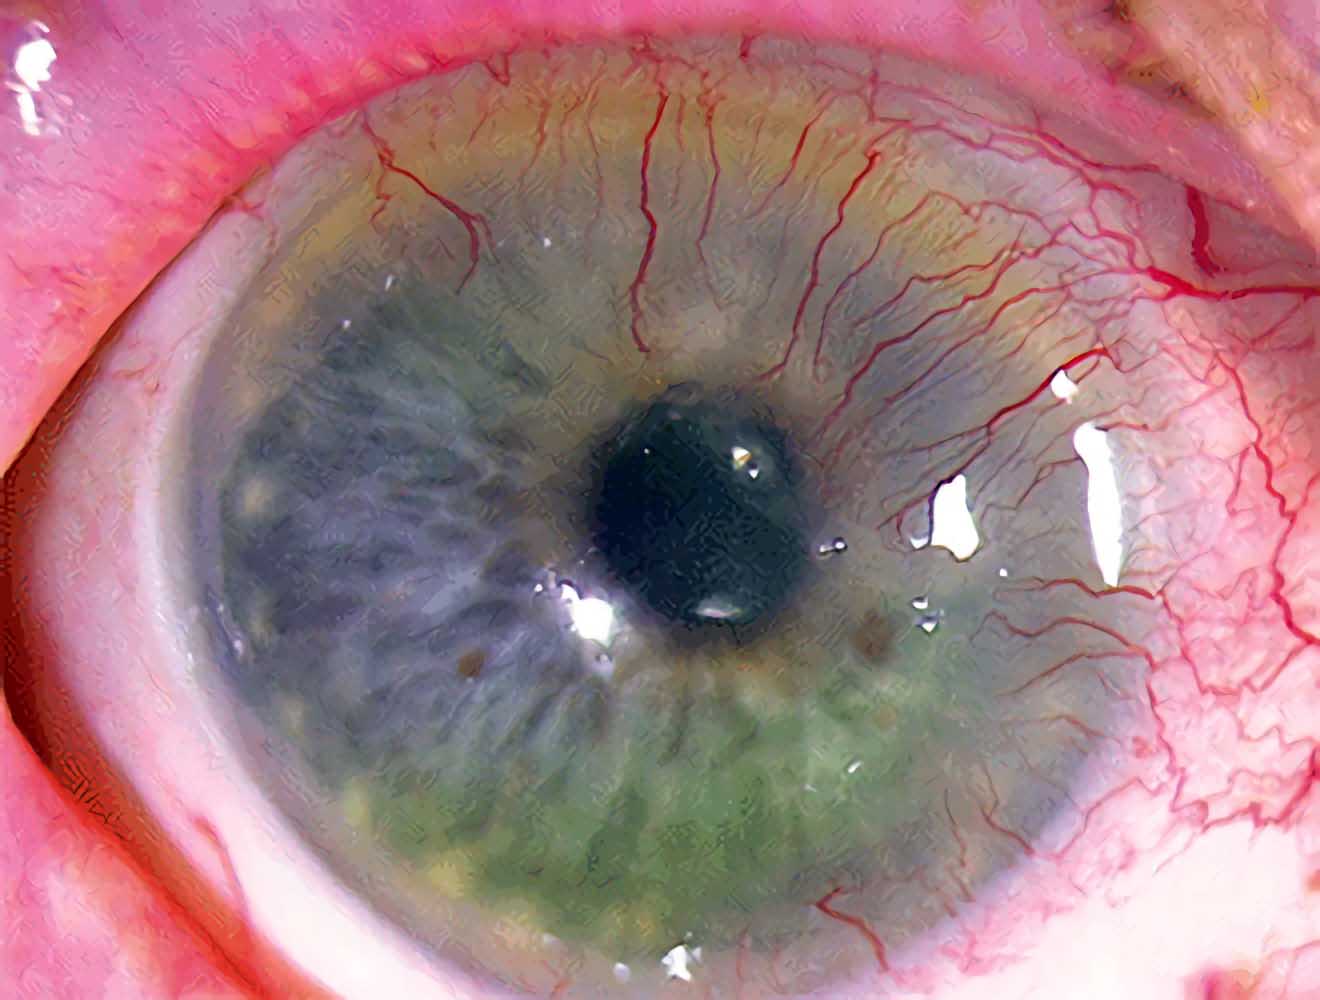 Neovascular disease caused by wearing contact lenses for a long time